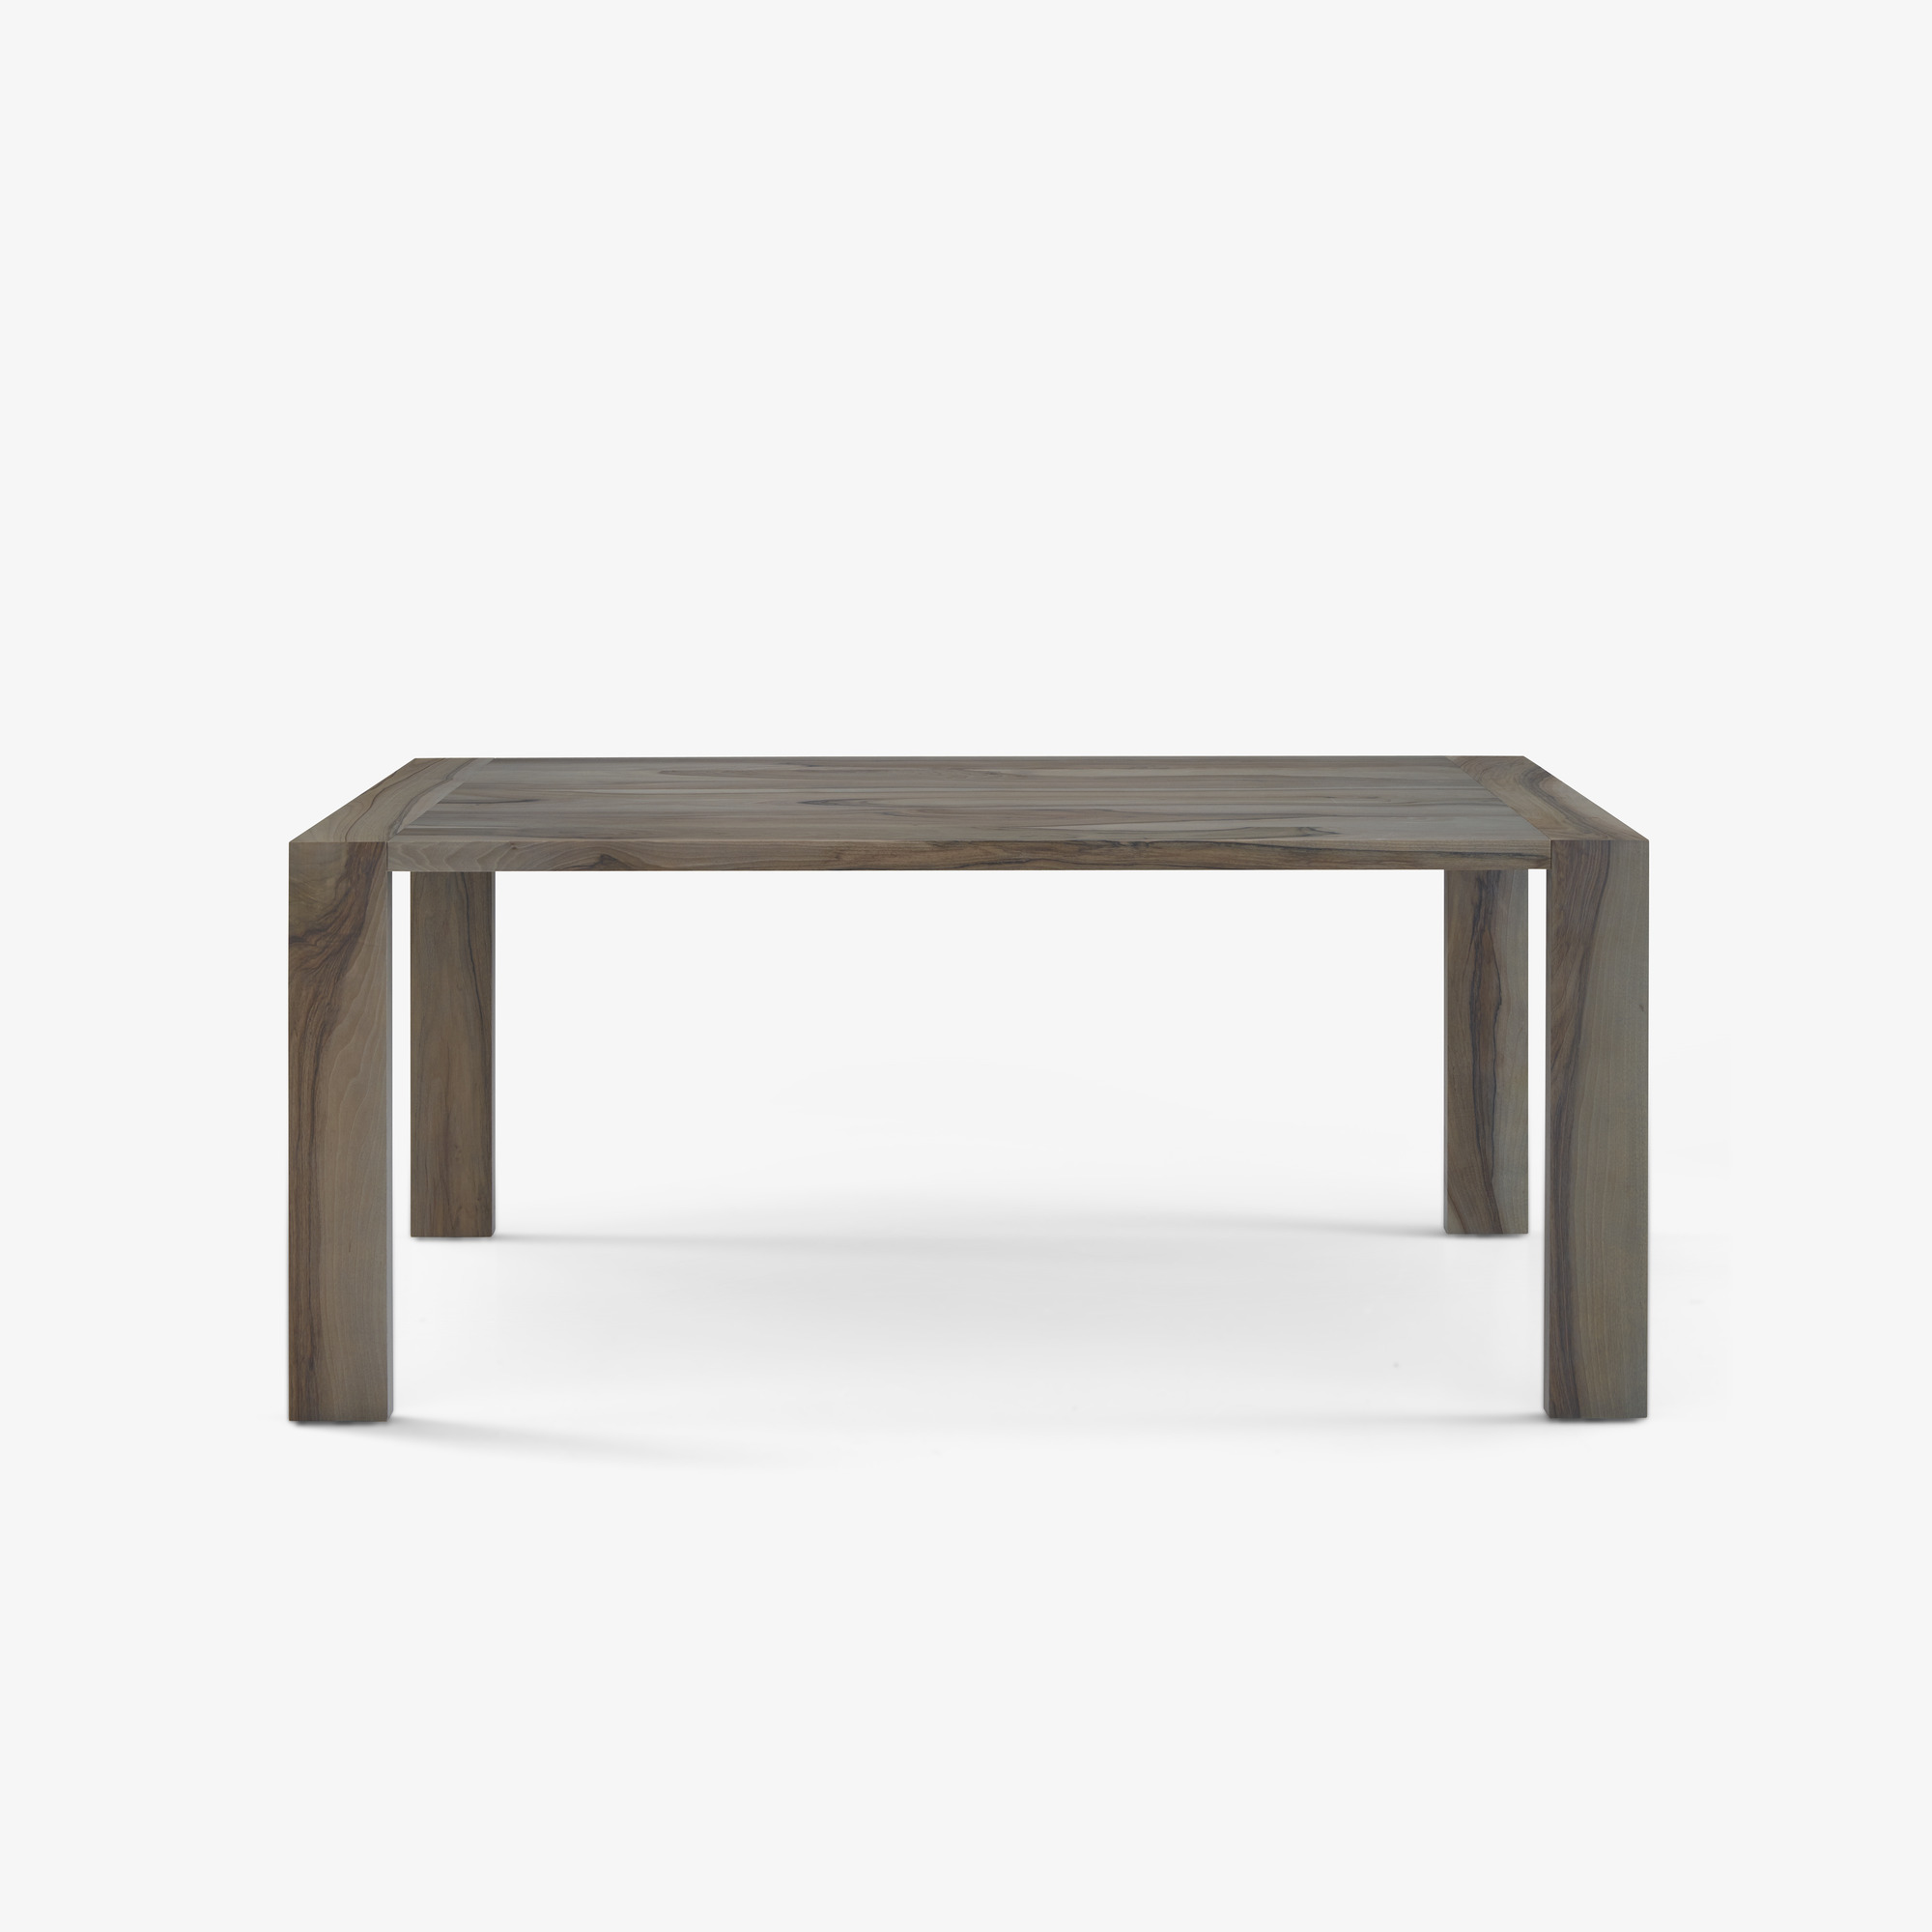 Image Dining table without extension leaf 6